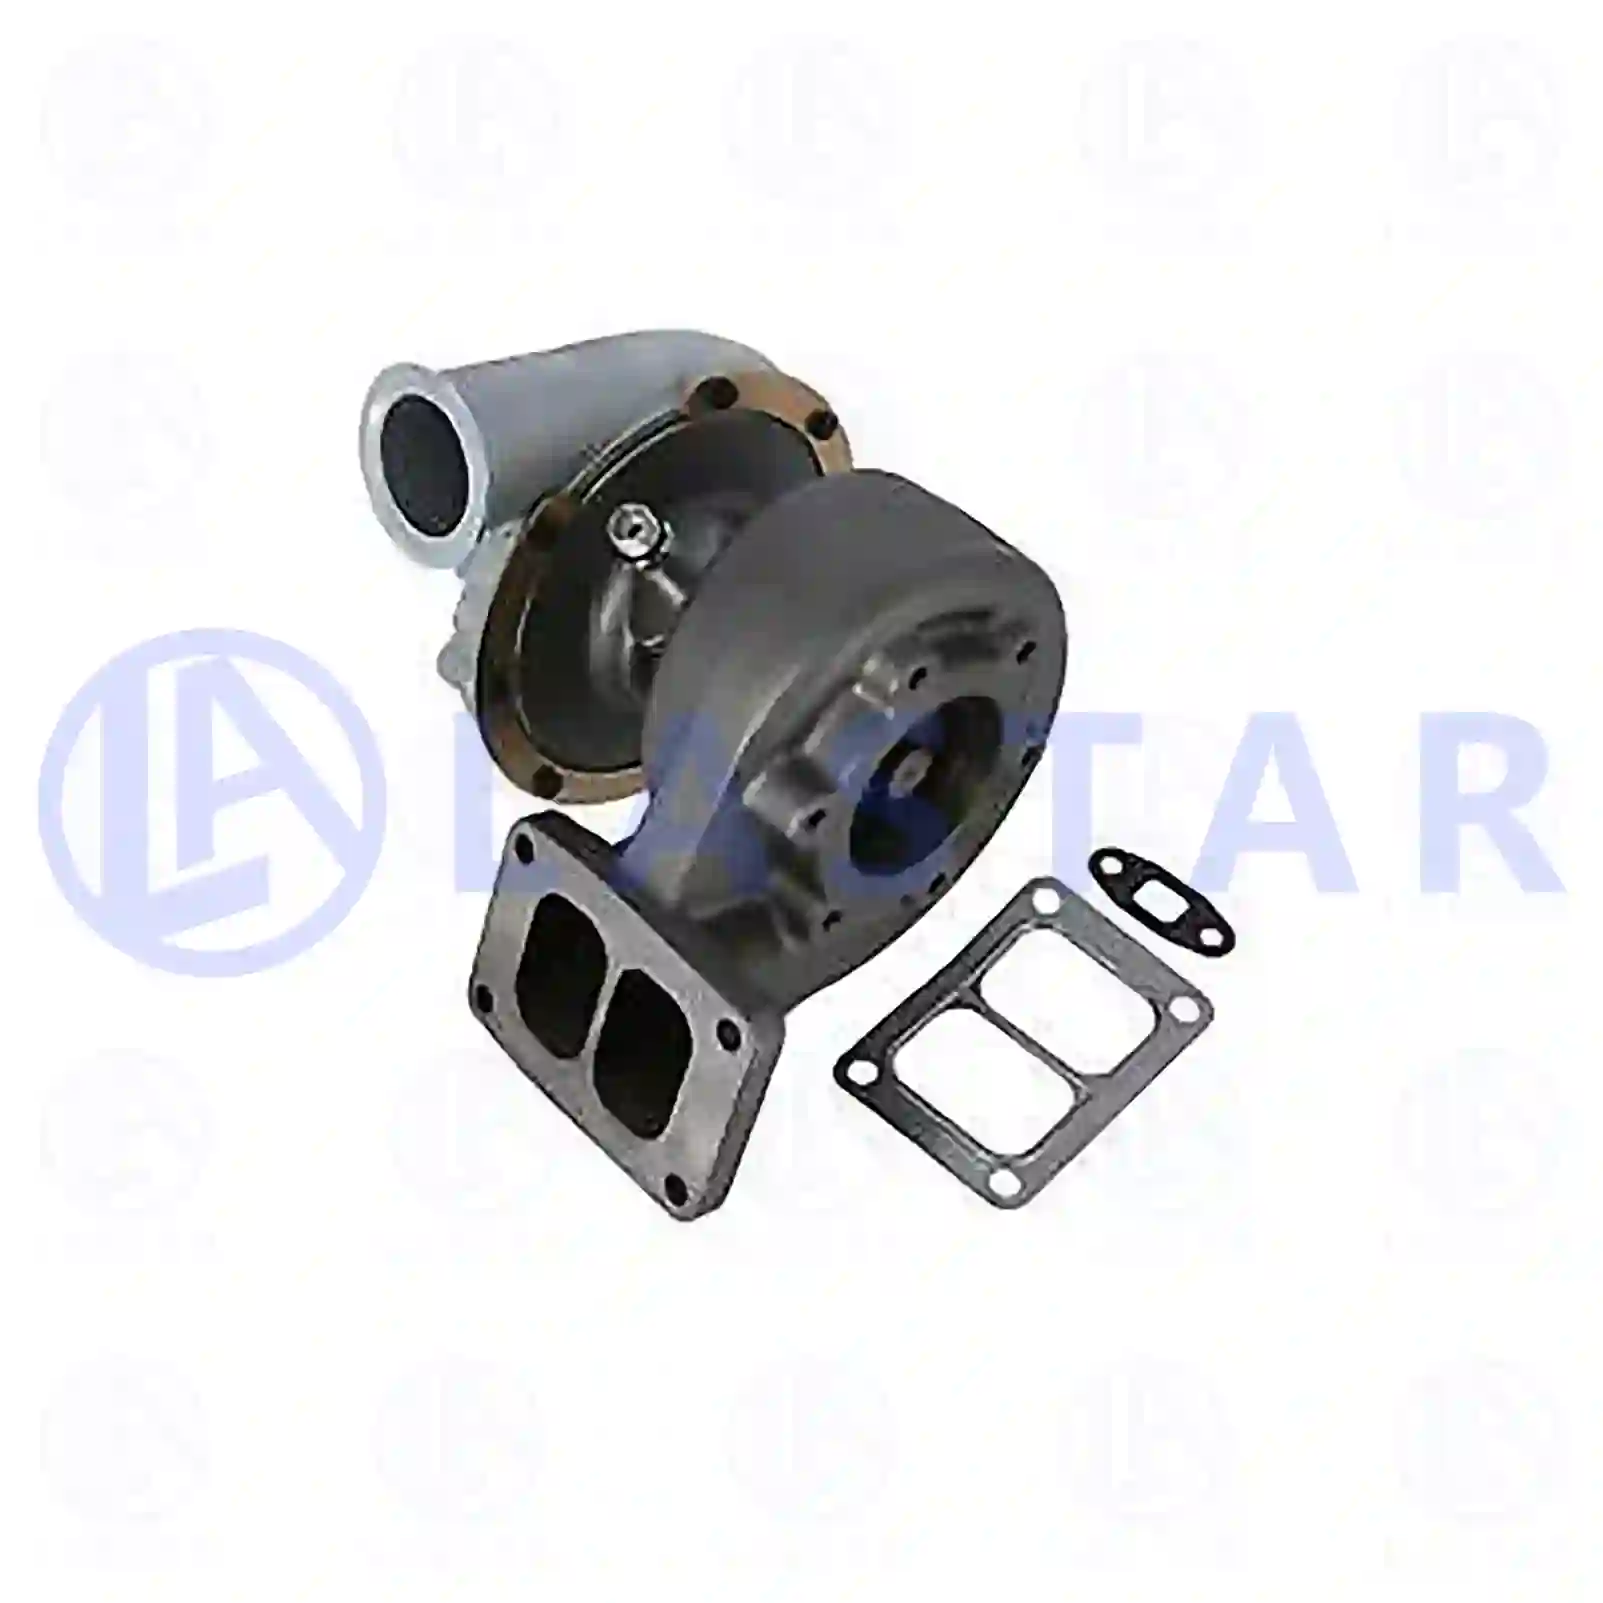 Turbocharger, with gasket kit, 77700358, 51091007277, 51091007287, 51091007291, 51091007294, 51091007302, 51091007303, 51091007331, 51091007427, 51091007428, 51091007429, 51091007431, 51091007464, 51091009291, 51091009331, 51091009421, 51091009427, 51091009429, 51091009431, 51091009464 ||  77700358 Lastar Spare Part | Truck Spare Parts, Auotomotive Spare Parts Turbocharger, with gasket kit, 77700358, 51091007277, 51091007287, 51091007291, 51091007294, 51091007302, 51091007303, 51091007331, 51091007427, 51091007428, 51091007429, 51091007431, 51091007464, 51091009291, 51091009331, 51091009421, 51091009427, 51091009429, 51091009431, 51091009464 ||  77700358 Lastar Spare Part | Truck Spare Parts, Auotomotive Spare Parts